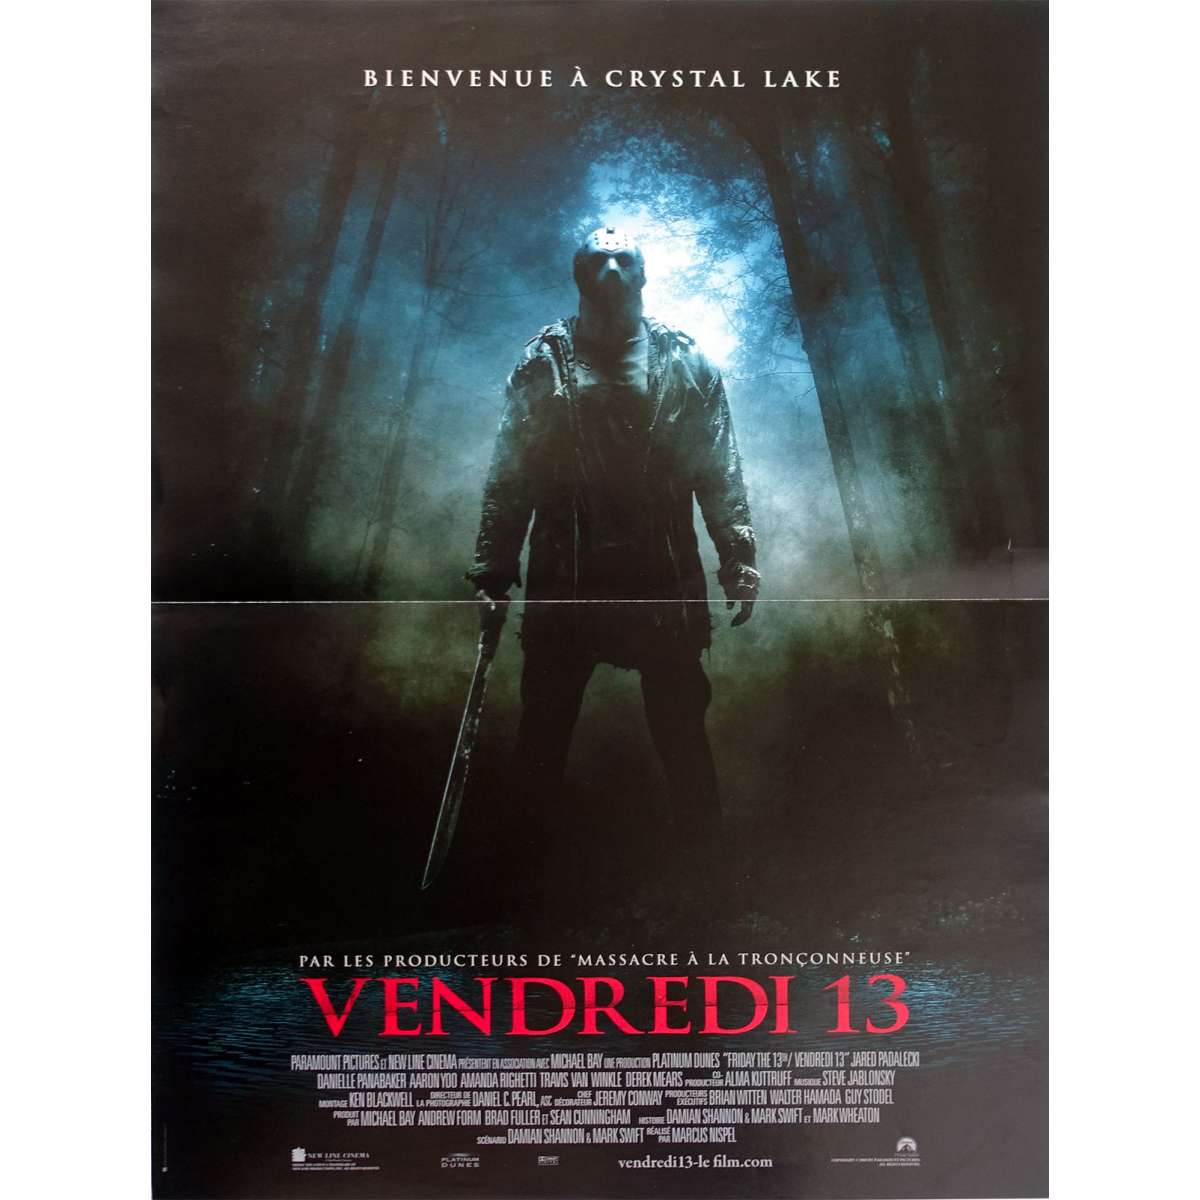 FRIDAY THE 13TH R Movie Poster 15x21 in.